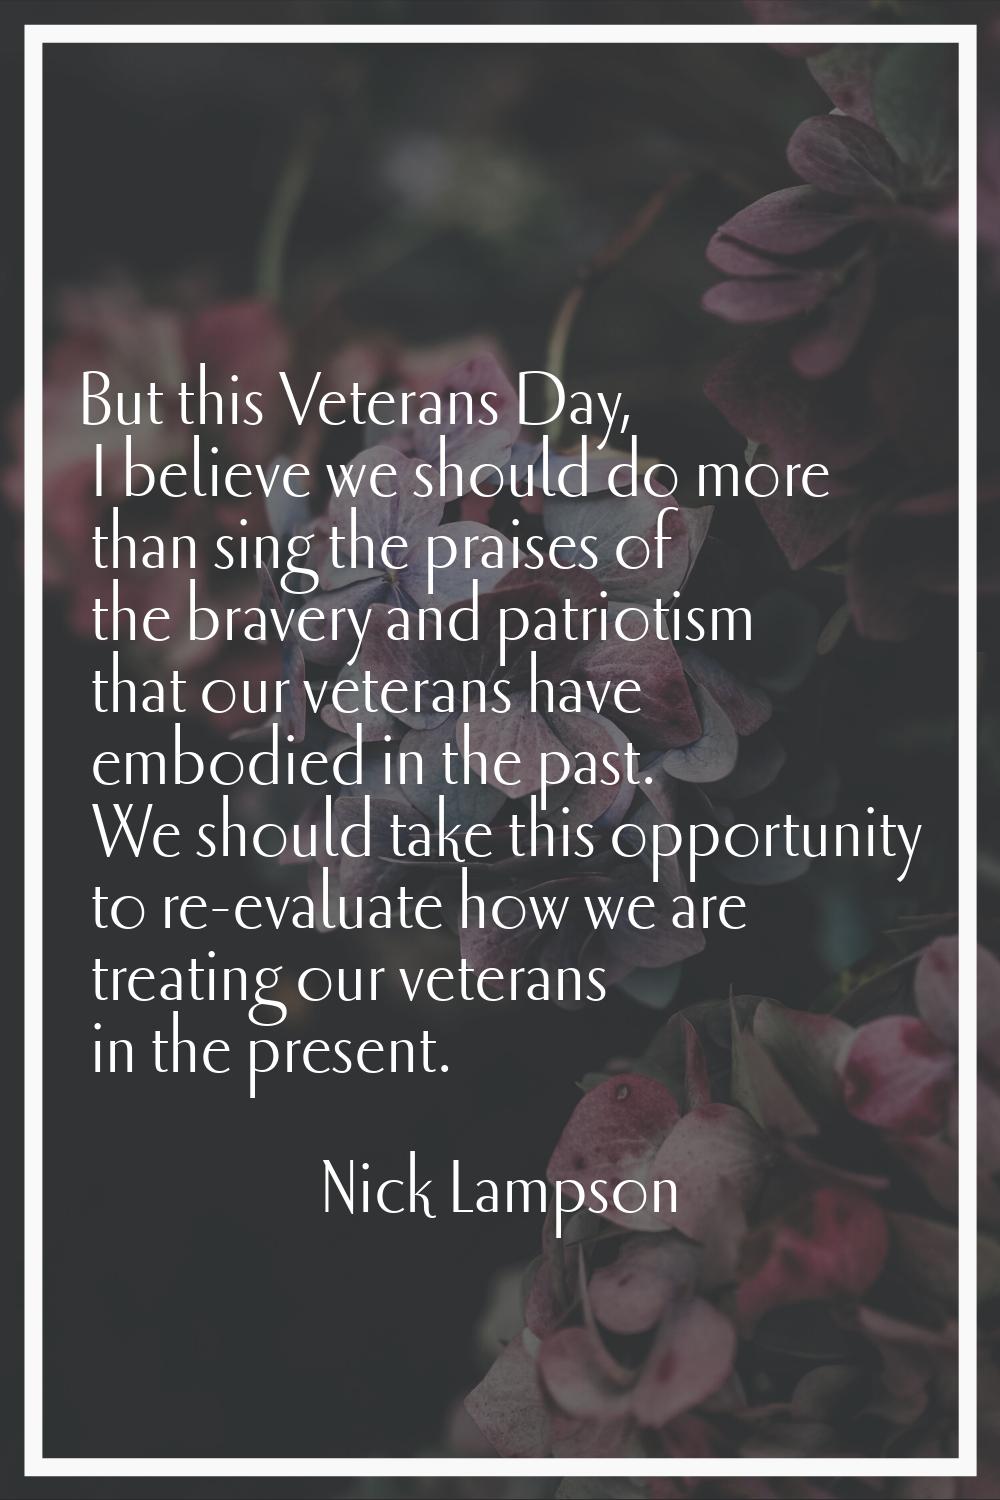 But this Veterans Day, I believe we should do more than sing the praises of the bravery and patriot